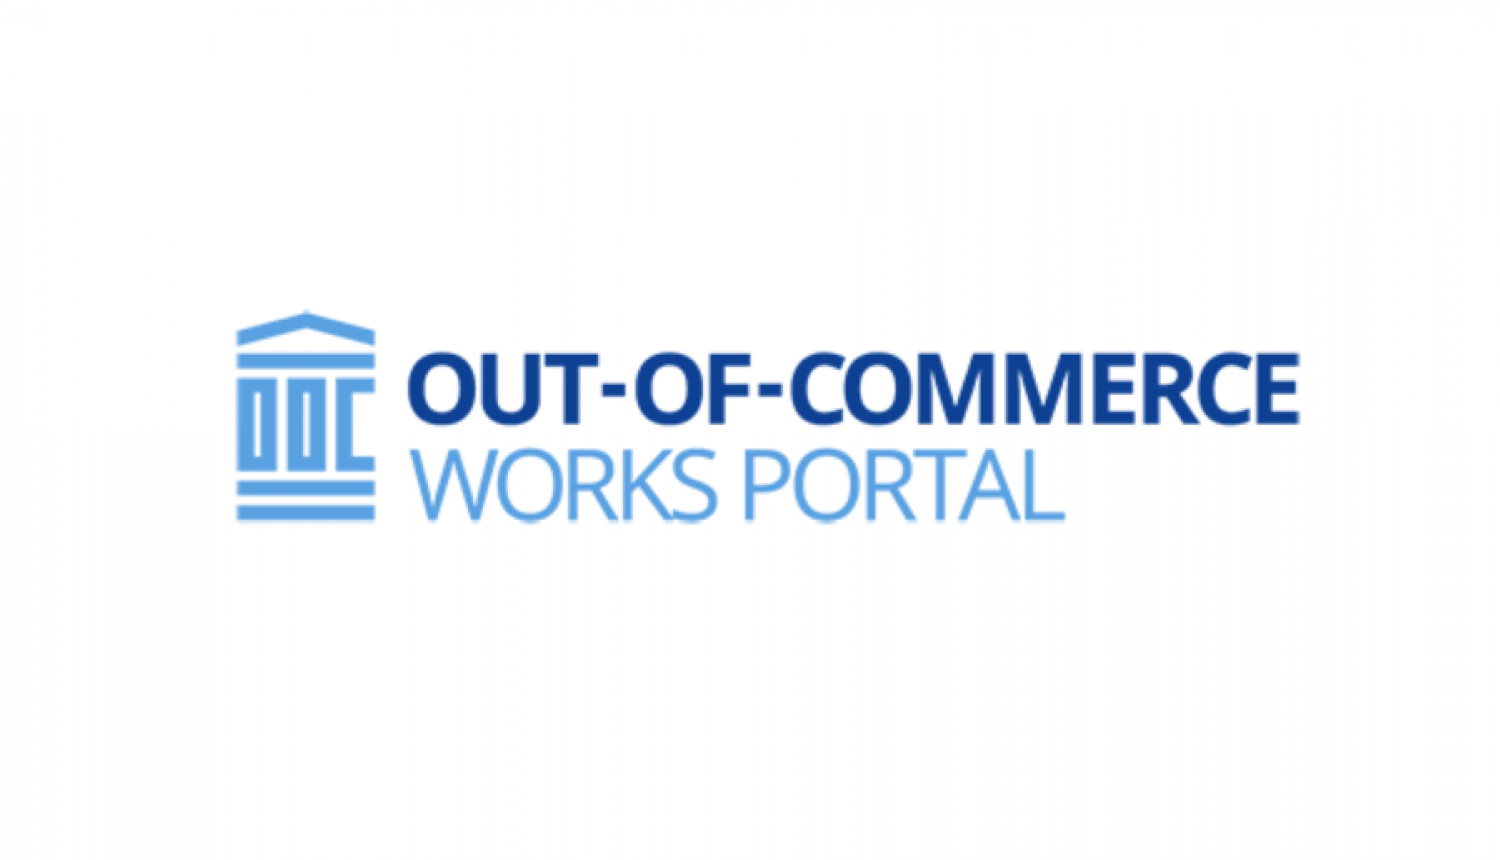 Out of commerce works